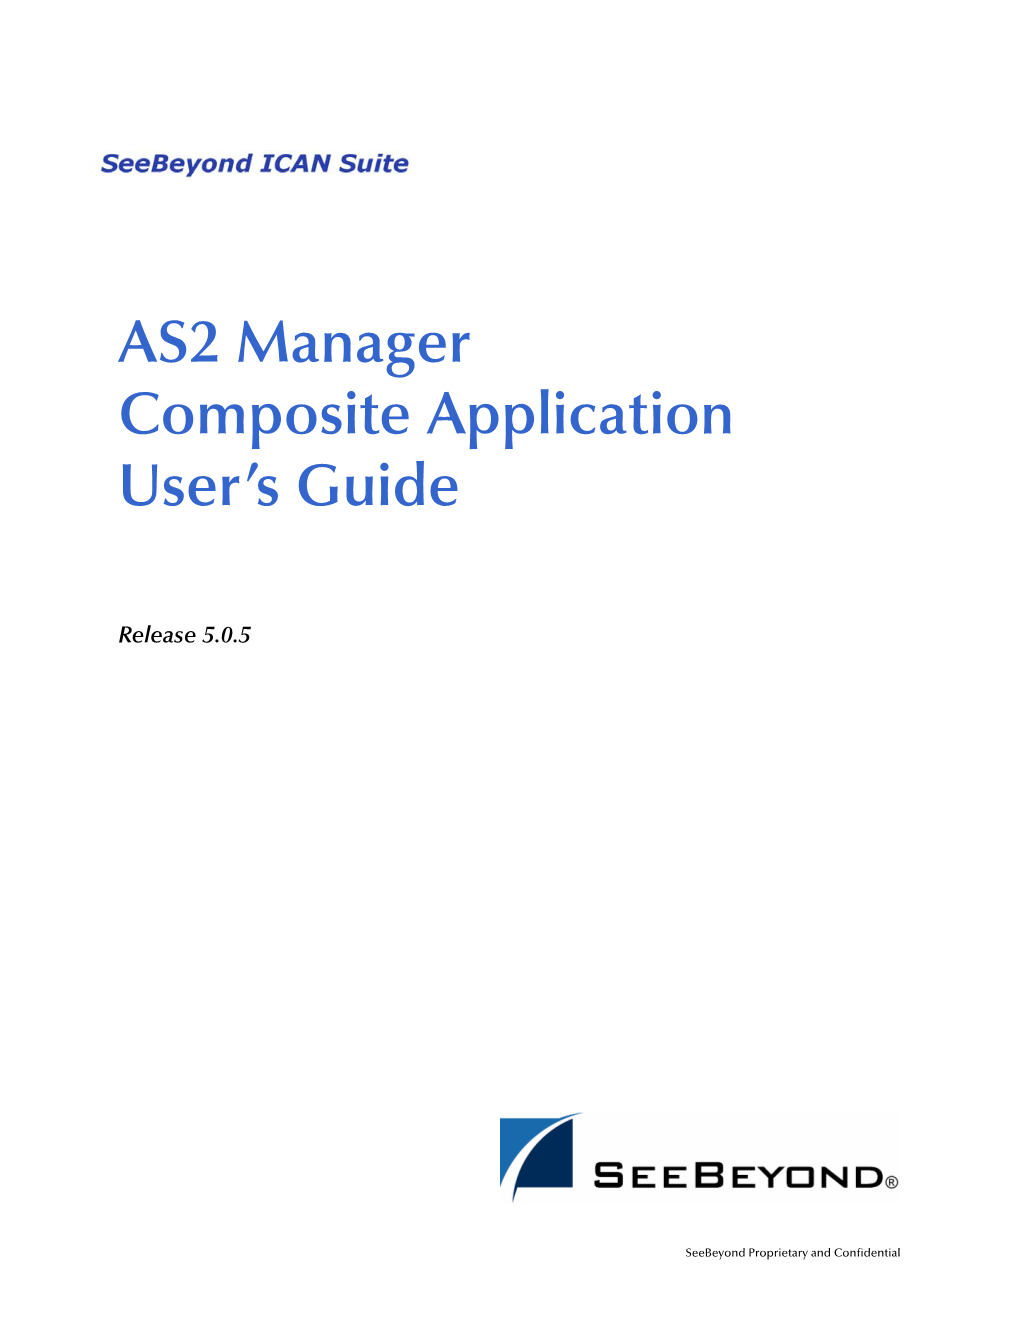 AS2 Manager Composite Application User's Guide